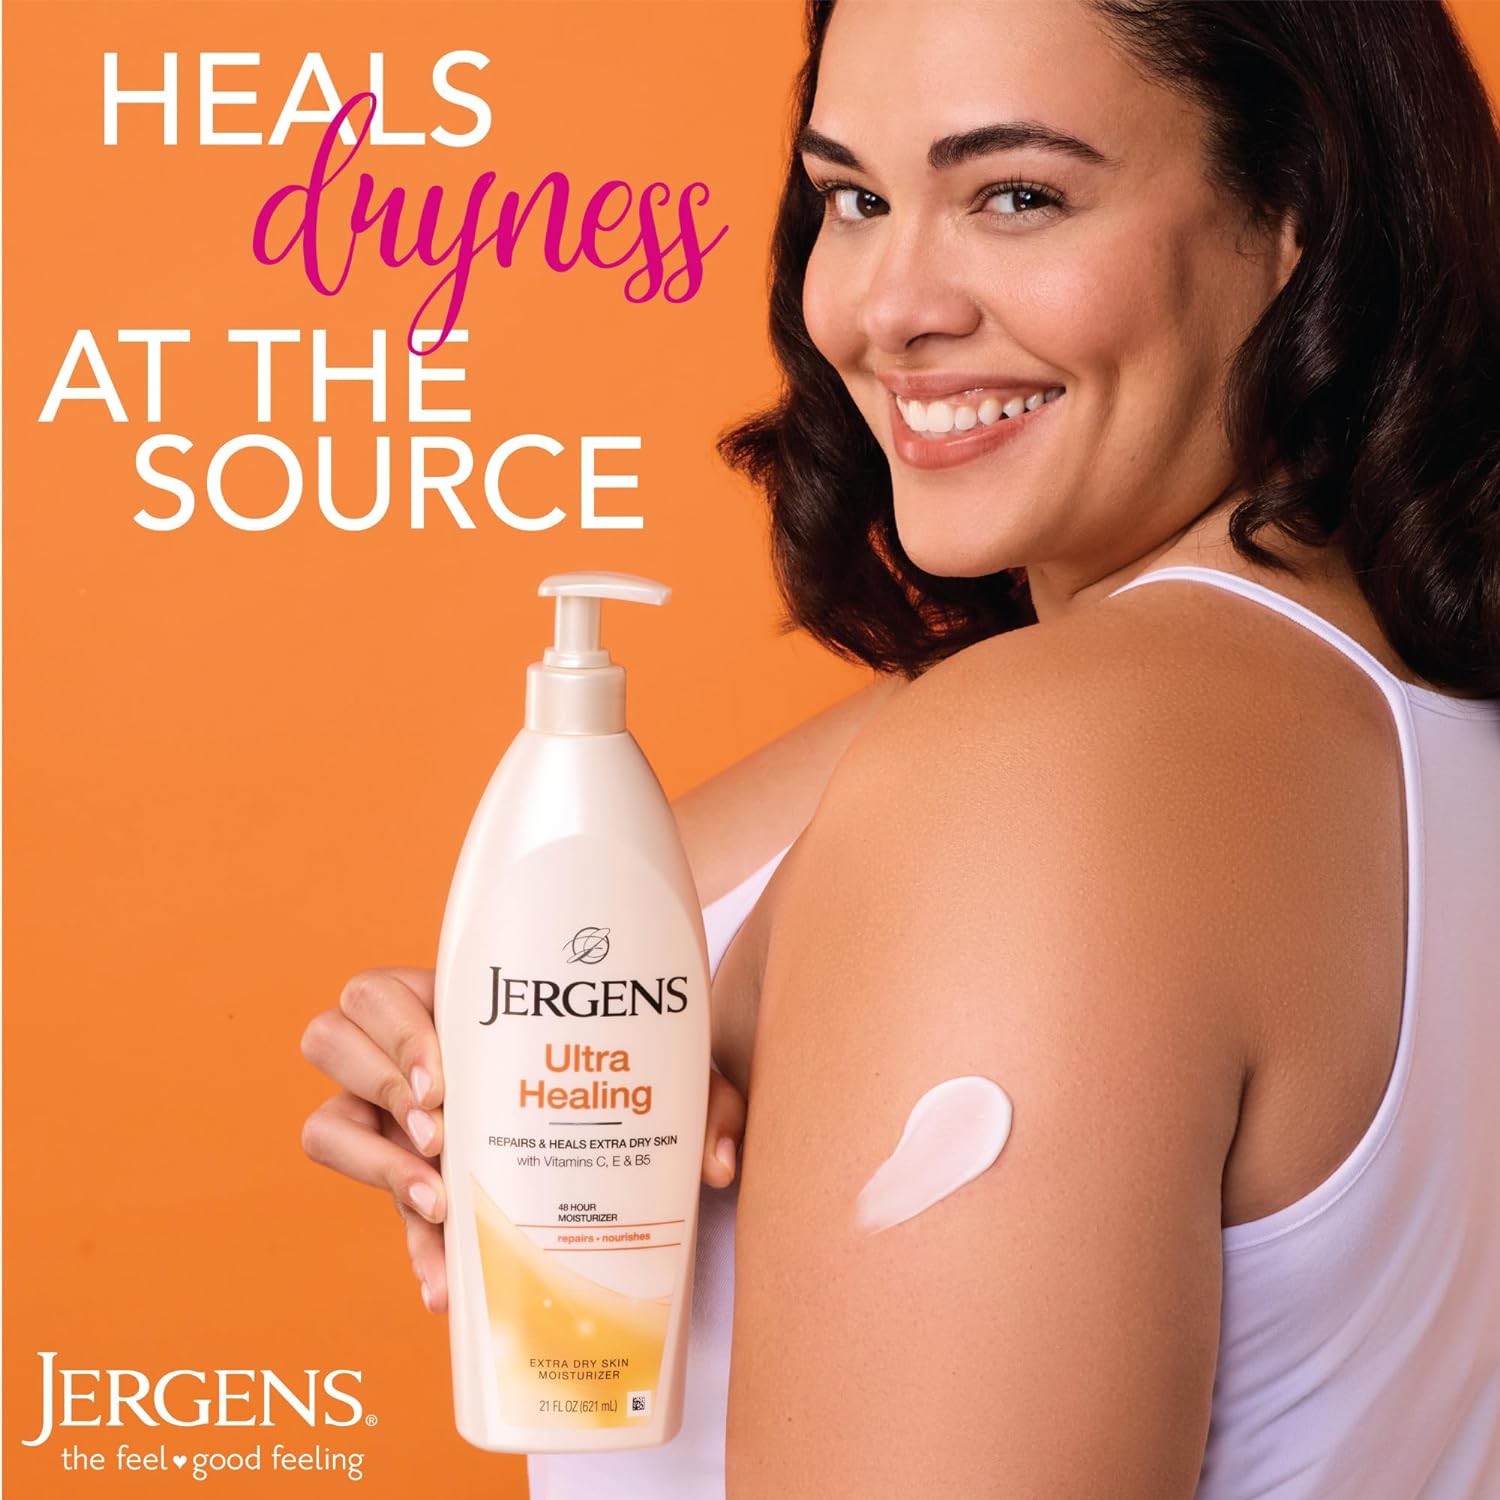 Jergens Ultra Healing Dry Skin Moisturizer, Travel Size Body and Hand Lotion, for Extra Dry Skin, Use After Washing Hands, HYDRALUCENCE blend, Vitamins C, E, B5, 1 Fl Oz (Pack of 24) : Beauty & Personal Care